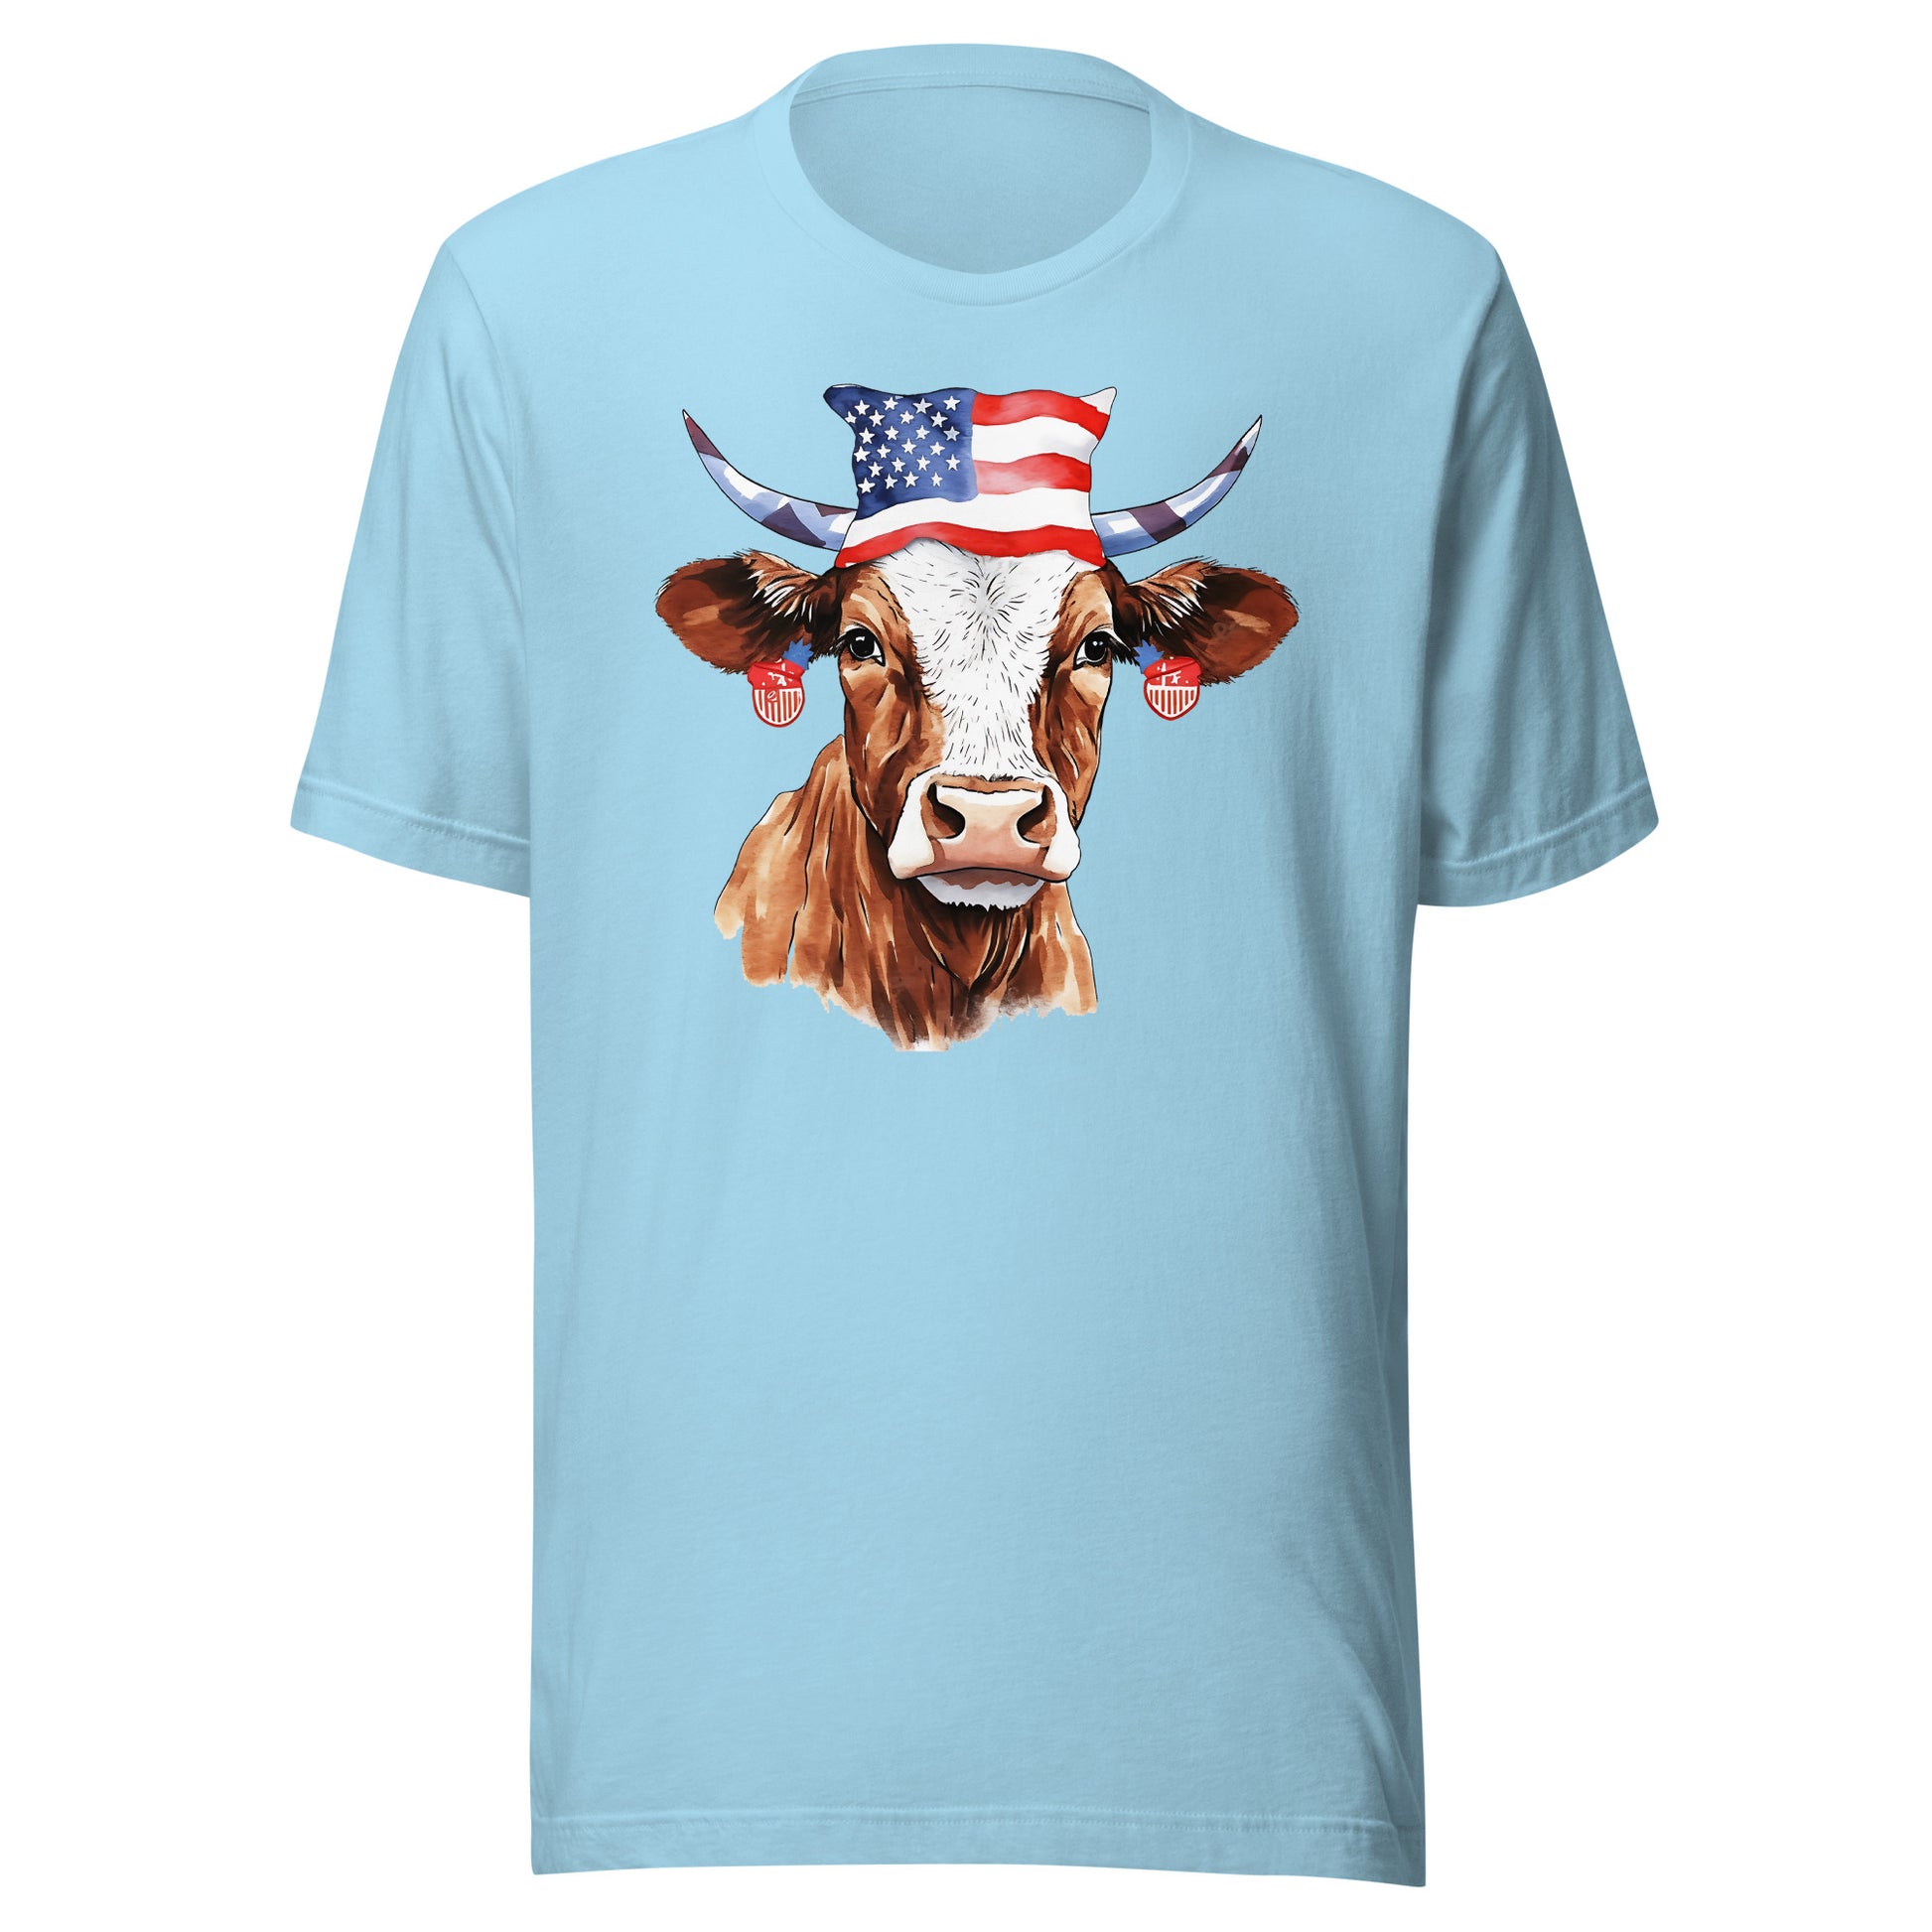 Patriotic Cow Tshirt For Cow Lovers Light Blue Color